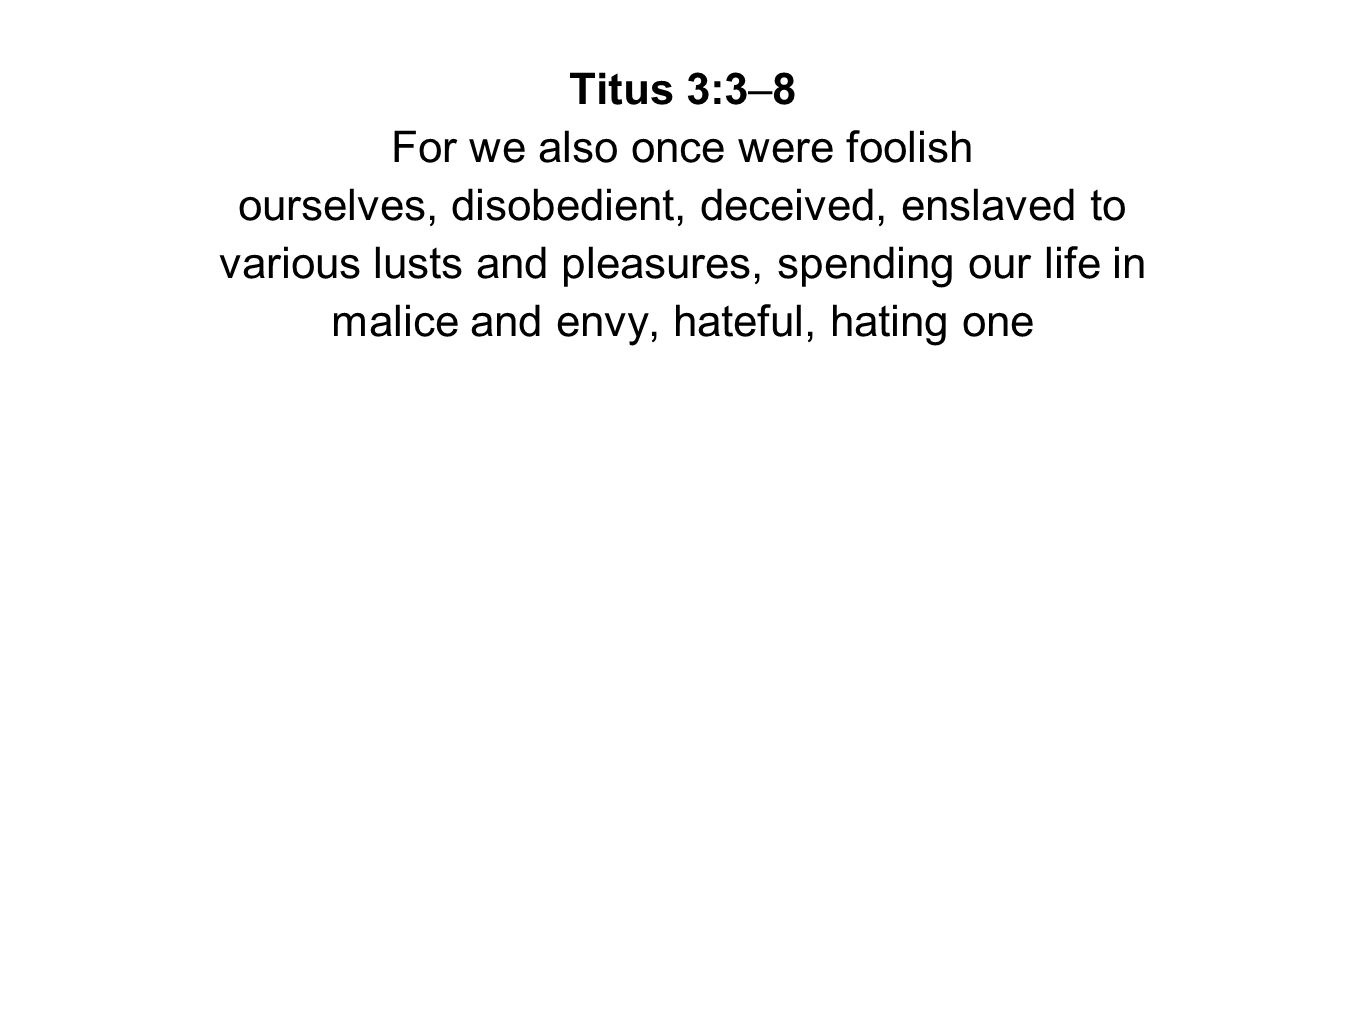 Titus 3:3–8 For we also once were foolish ourselves, disobedient, deceived, enslaved to various lusts and pleasures, spending our life in malice and envy, hateful, hating one